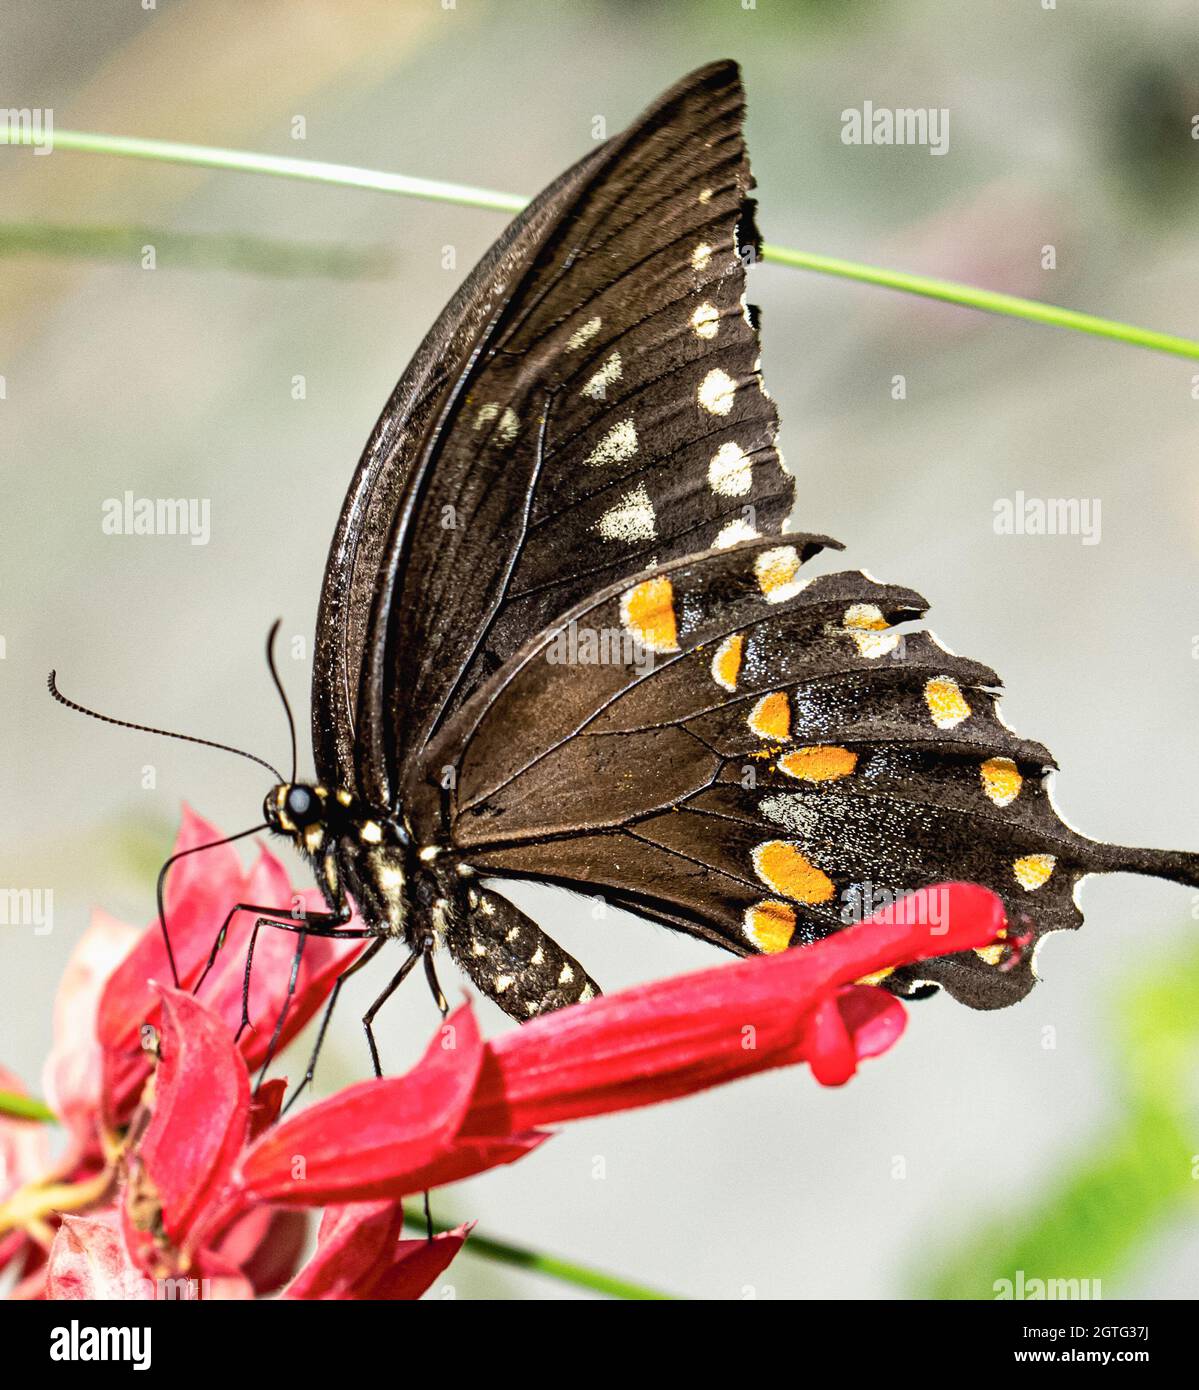 A dramatic macro sideview of a Spicebush Swallowtail (Papilio troilus) with its proboscis inserted into a bright red BeeBalm flower (Monarda didyma). Stock Photo